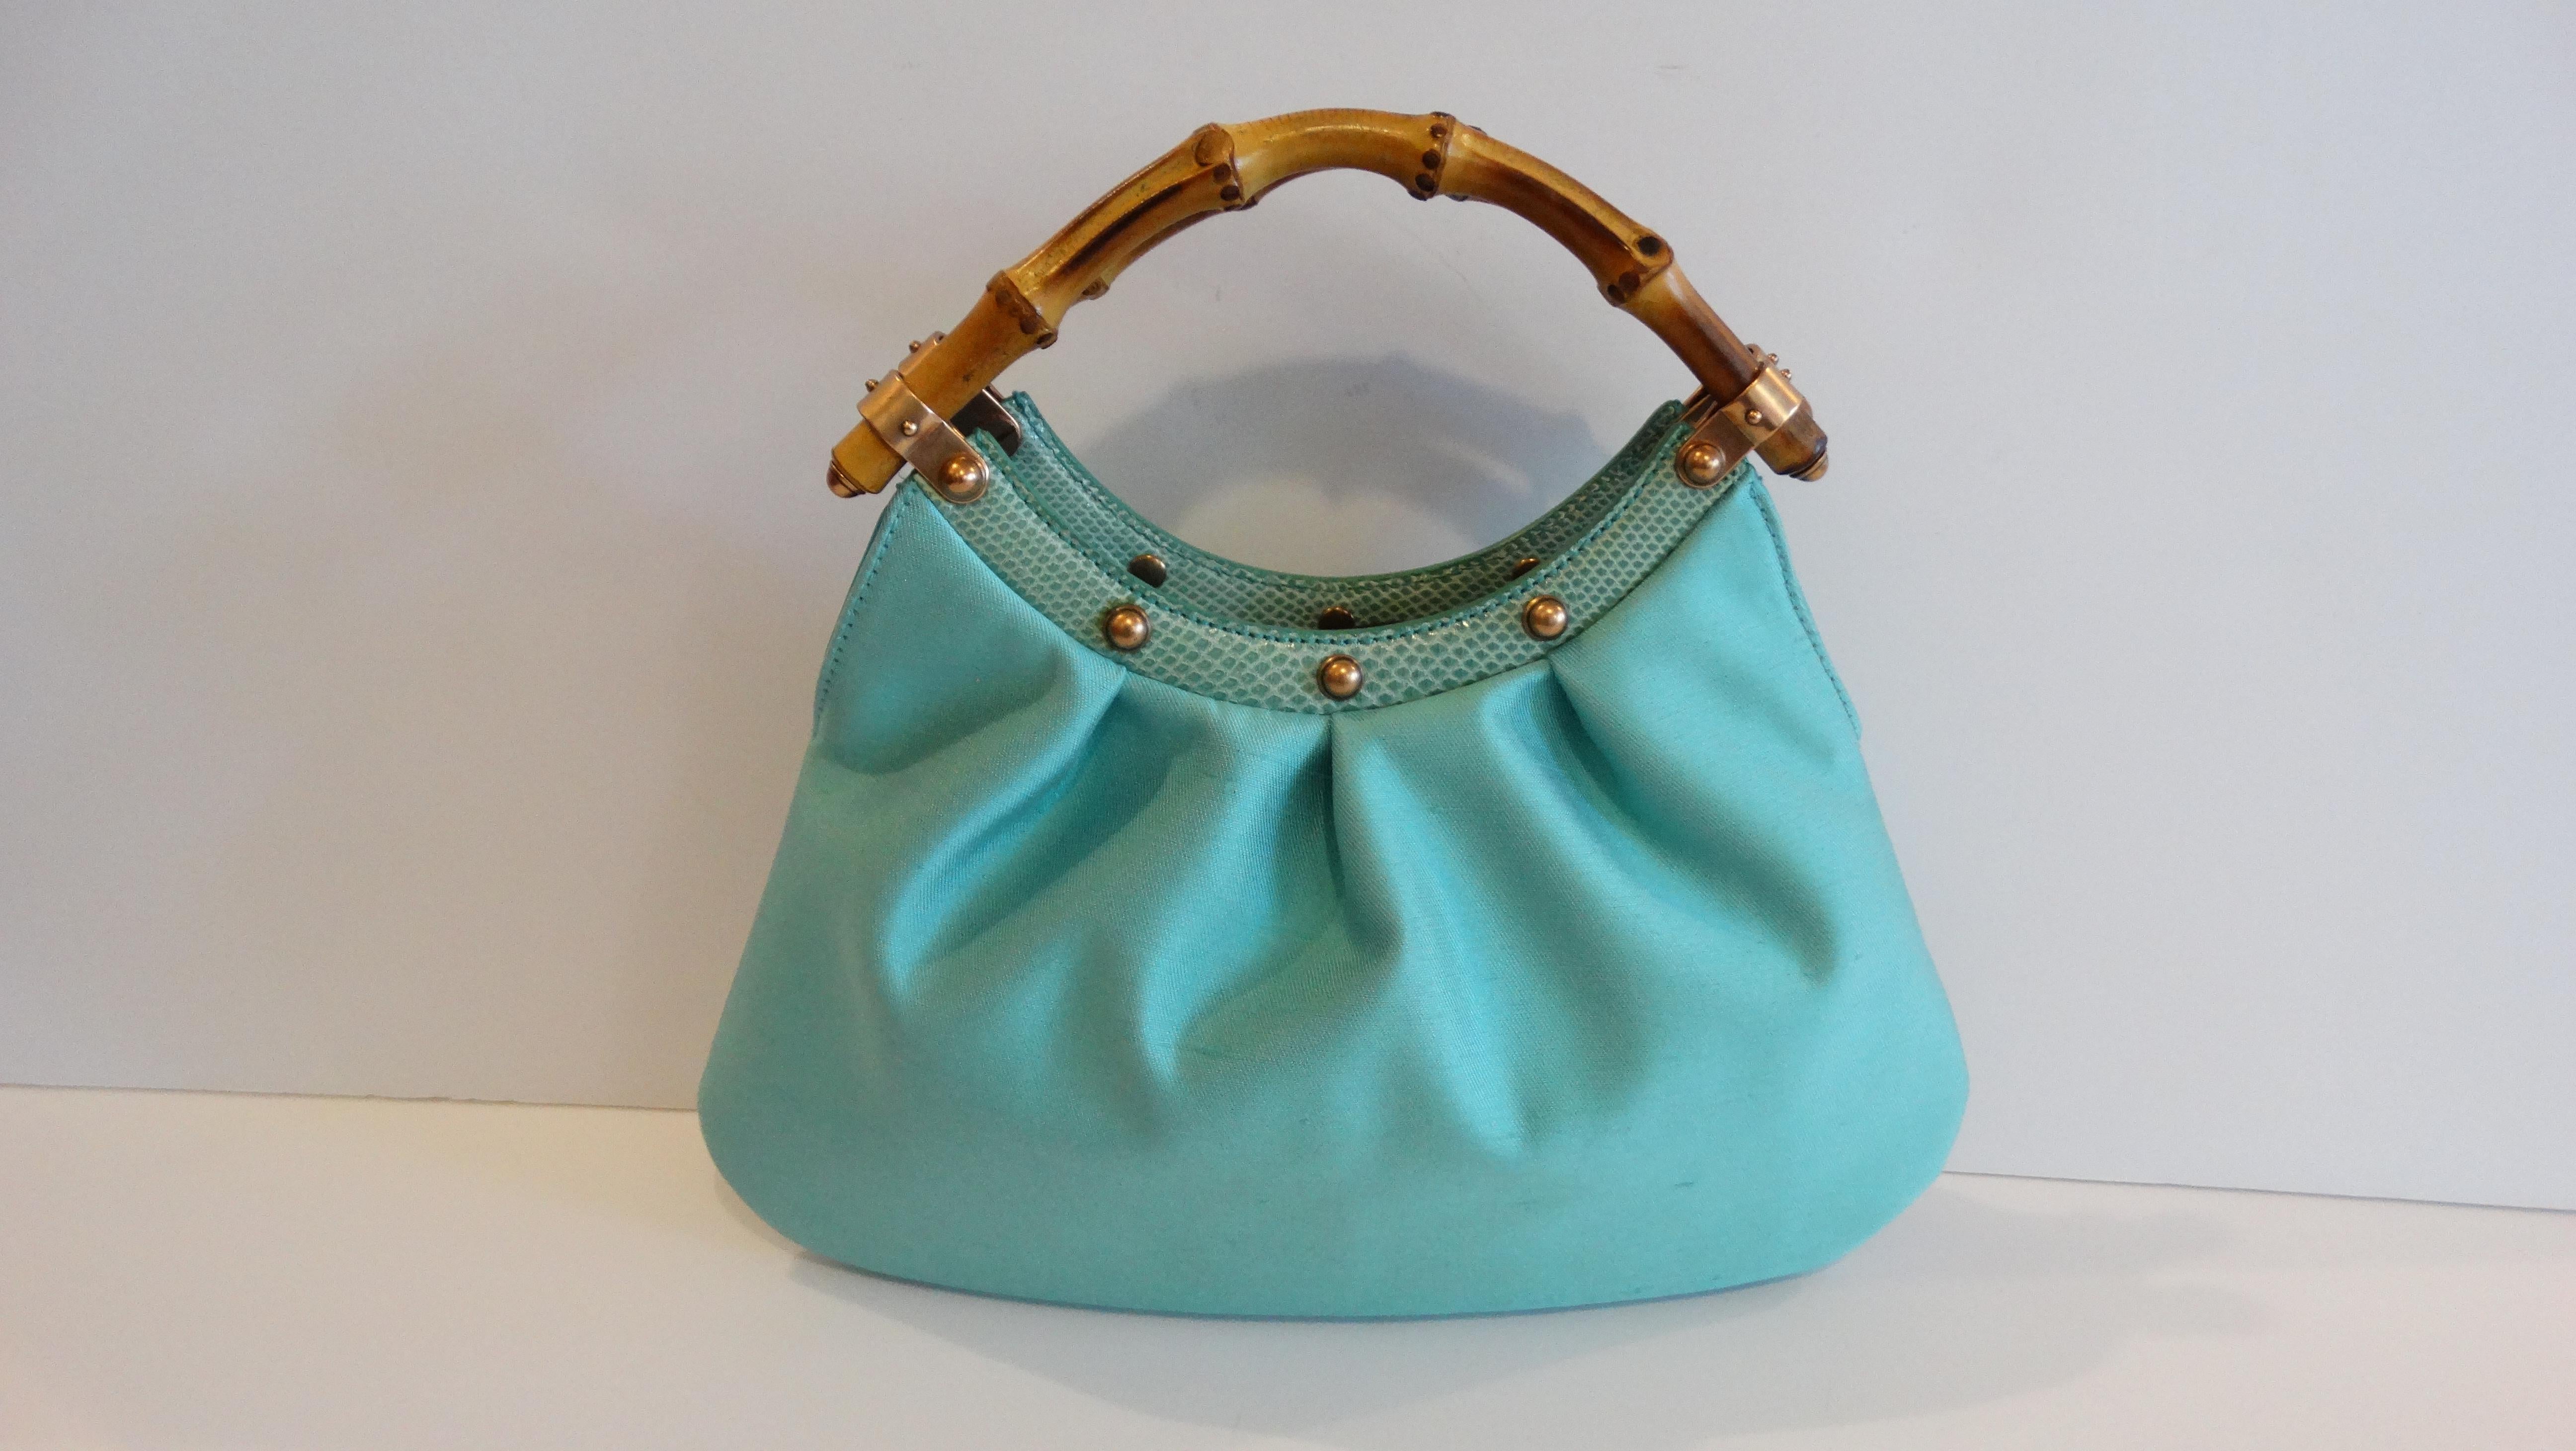 Get your Gucci on with this adorable handbag! Circa 1990s, this mini hobo bag is of made silk turquoise fabric and features beautiful dual bamboo handles. Includes gold-tone studded embellishments along the top of the tonal snake print accent.